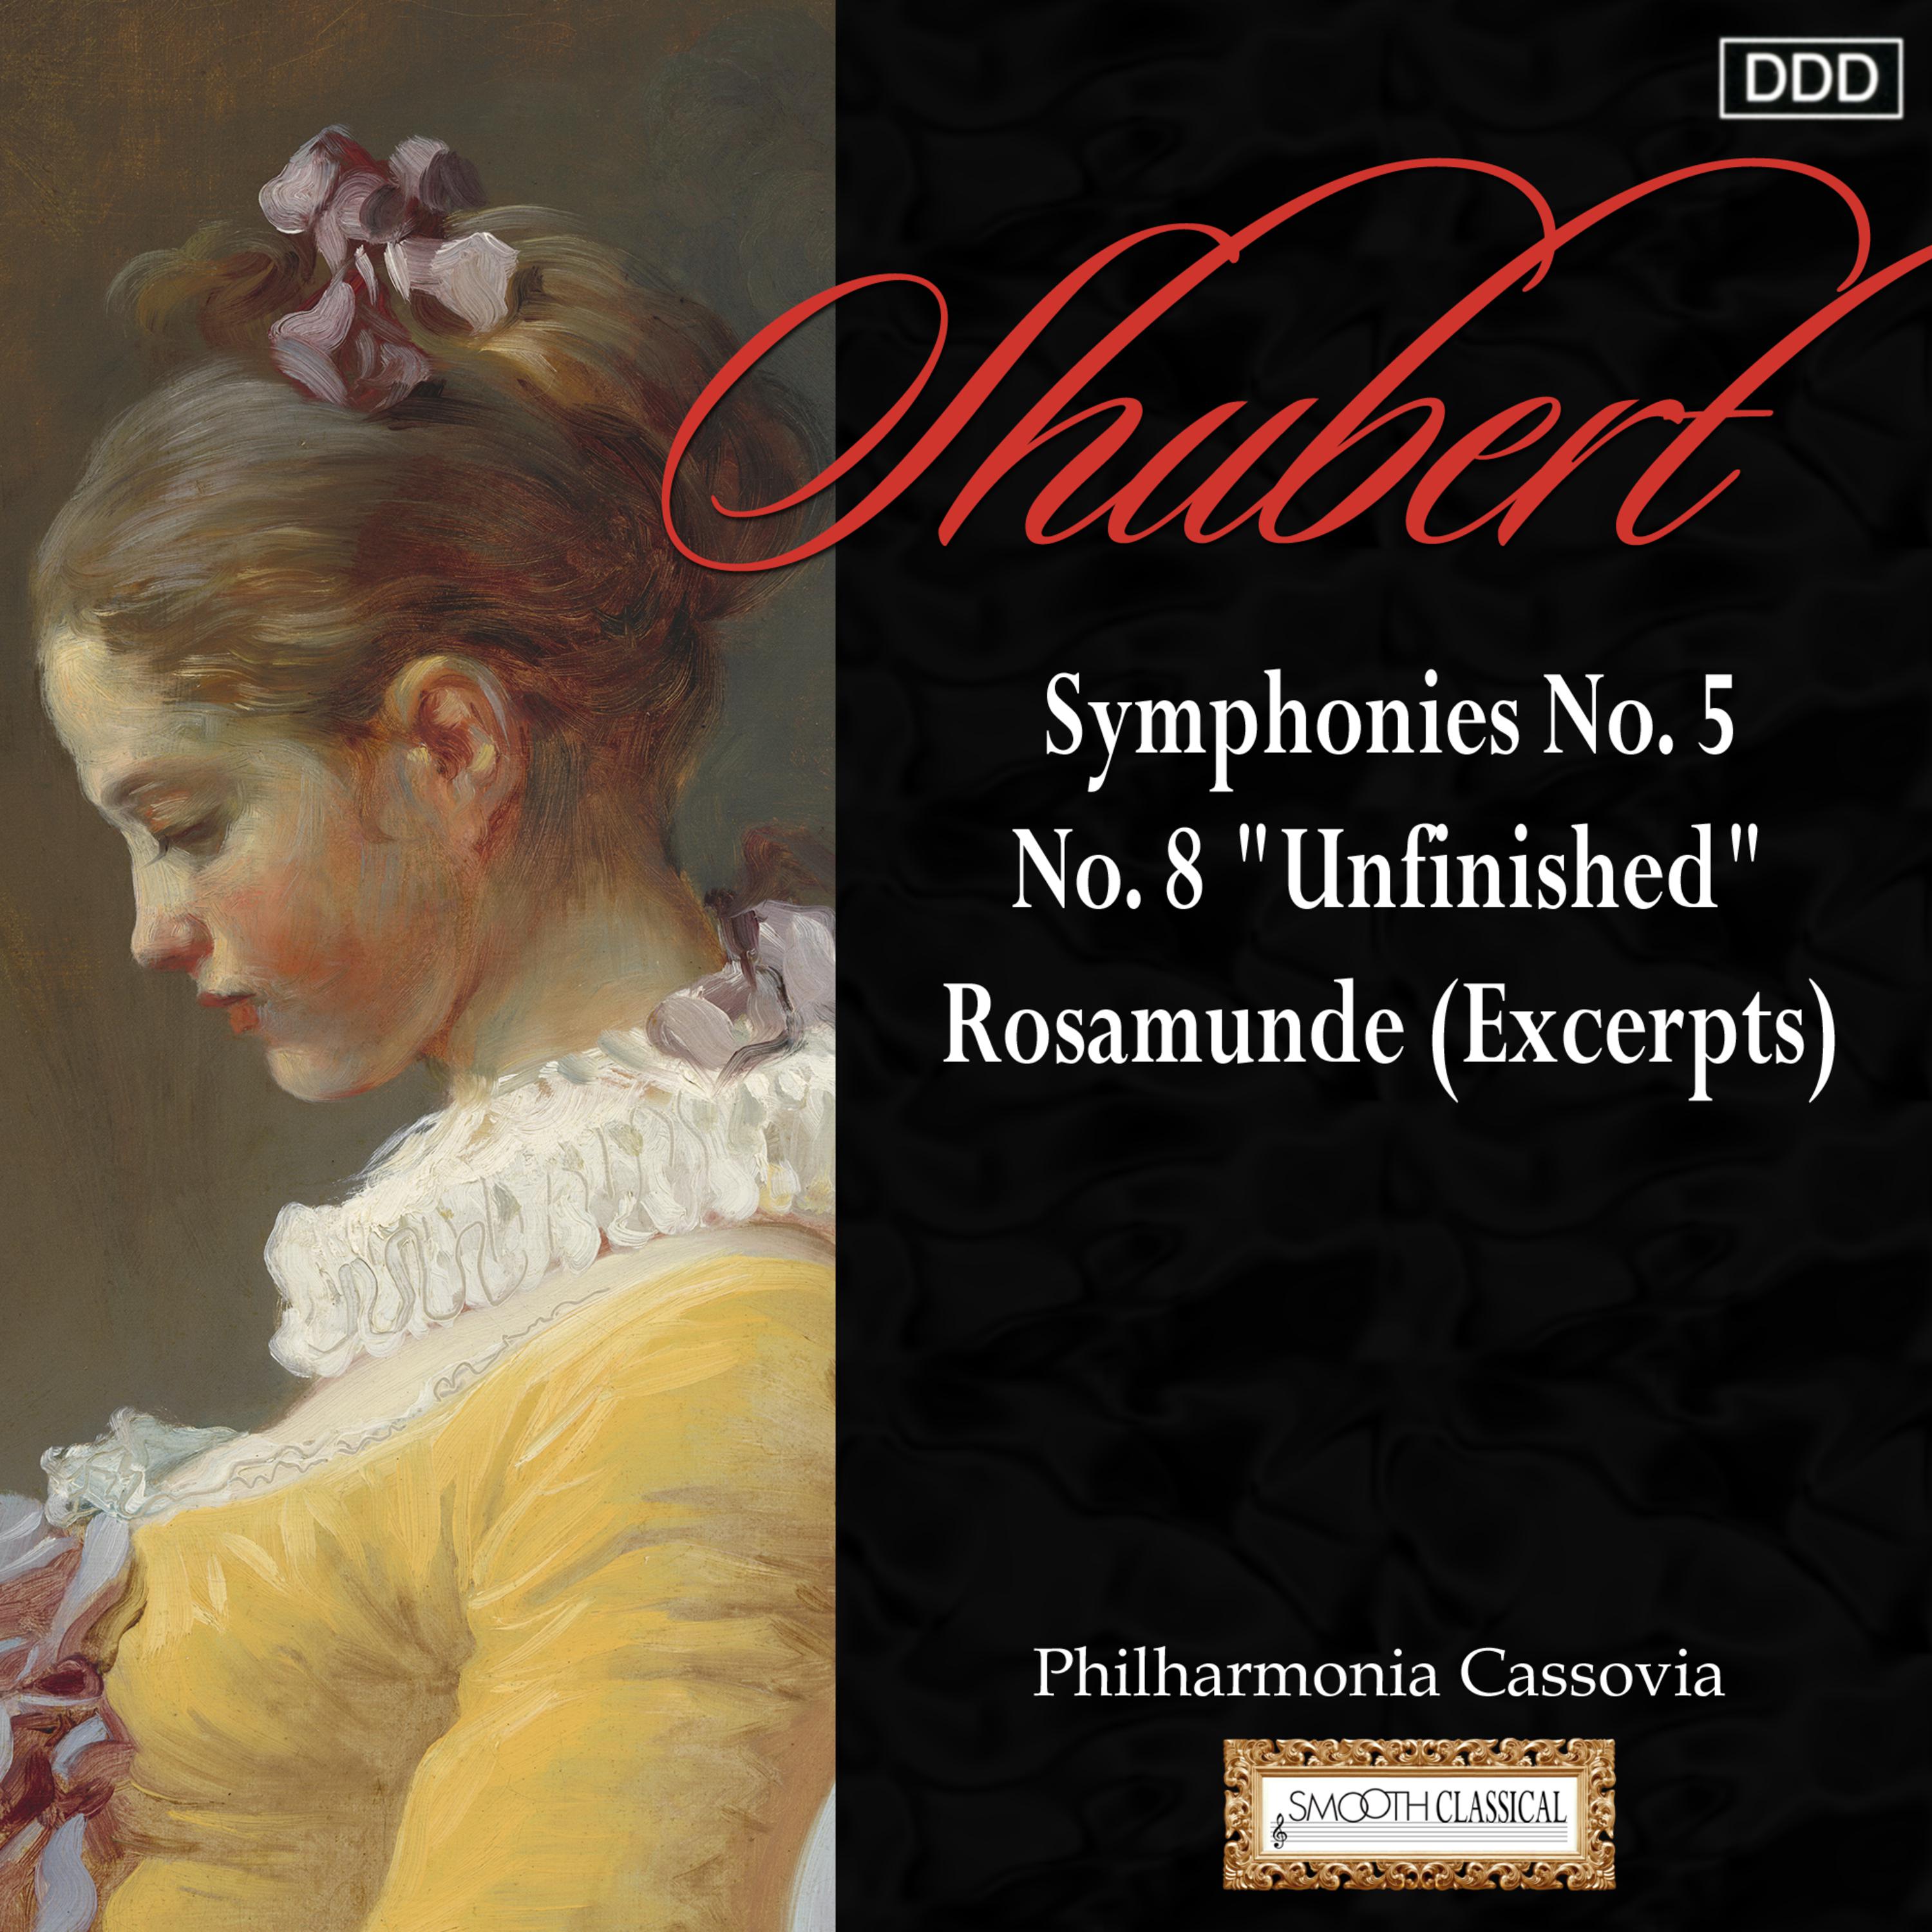 Symphony No. 7 in B Minor, D. 759 "Unfinished": II. Andante con moto